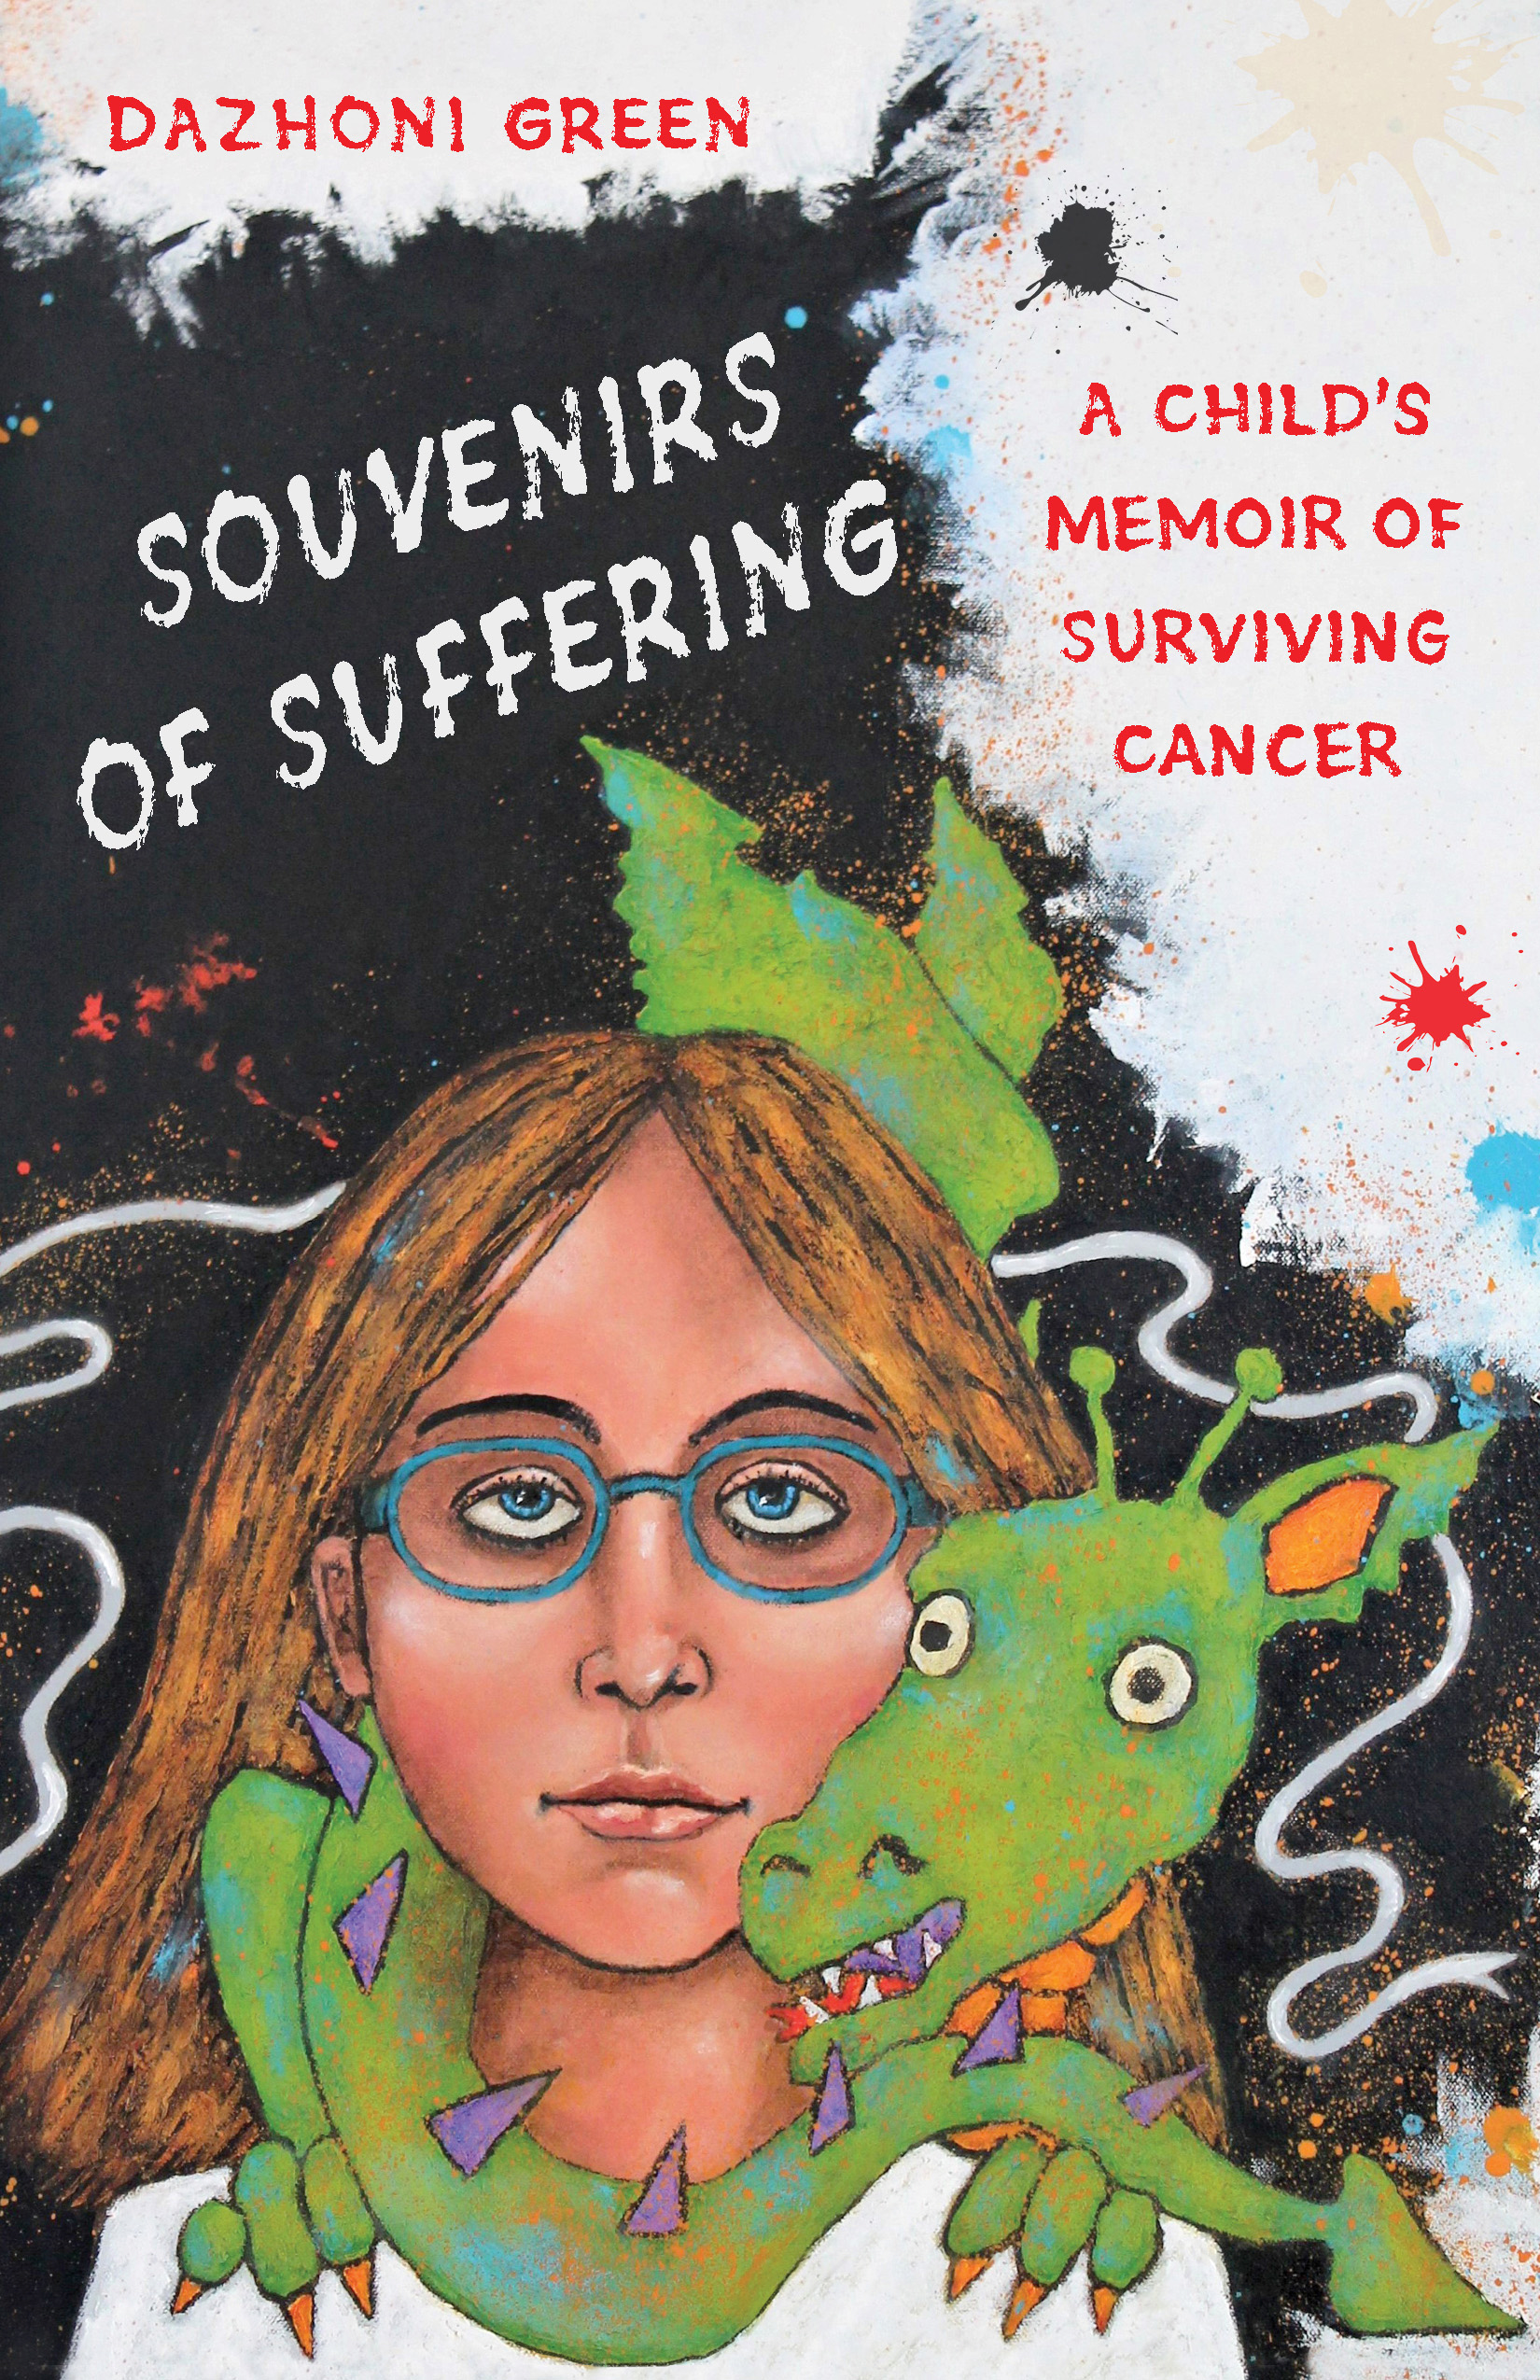 FREE: SOUVENIRS OF SUFFERING: A Child’s Memoir of Surviving Cancer by Dazhoni Green